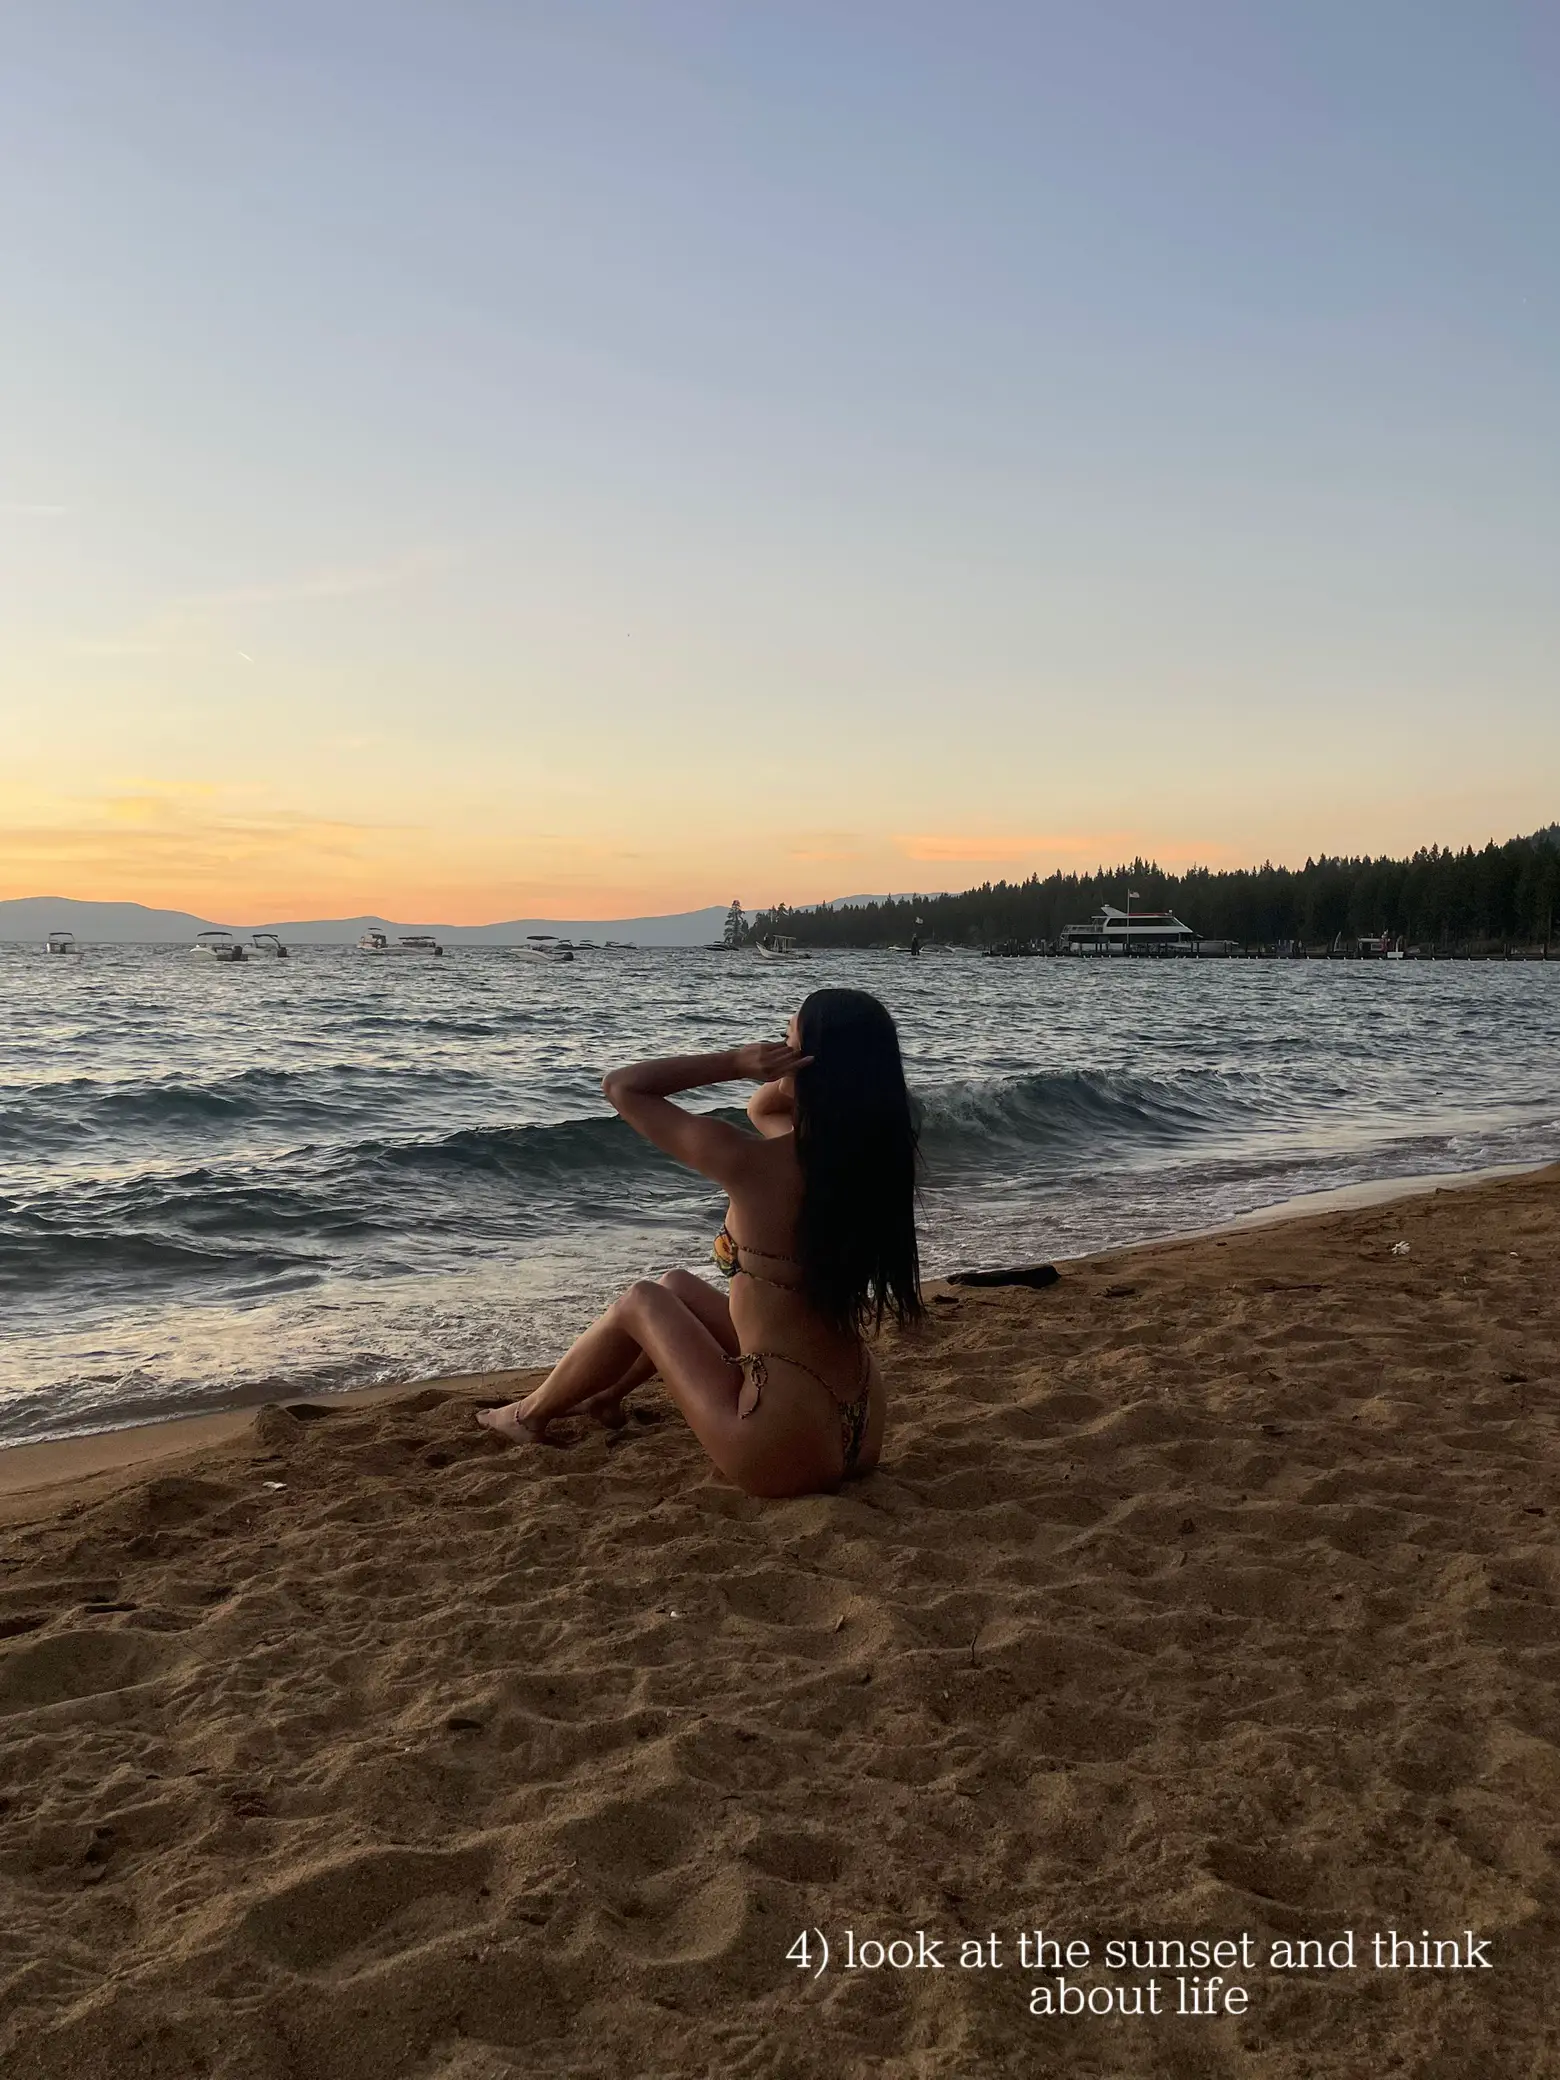  A woman is sitting on a beach, looking at the sunset.